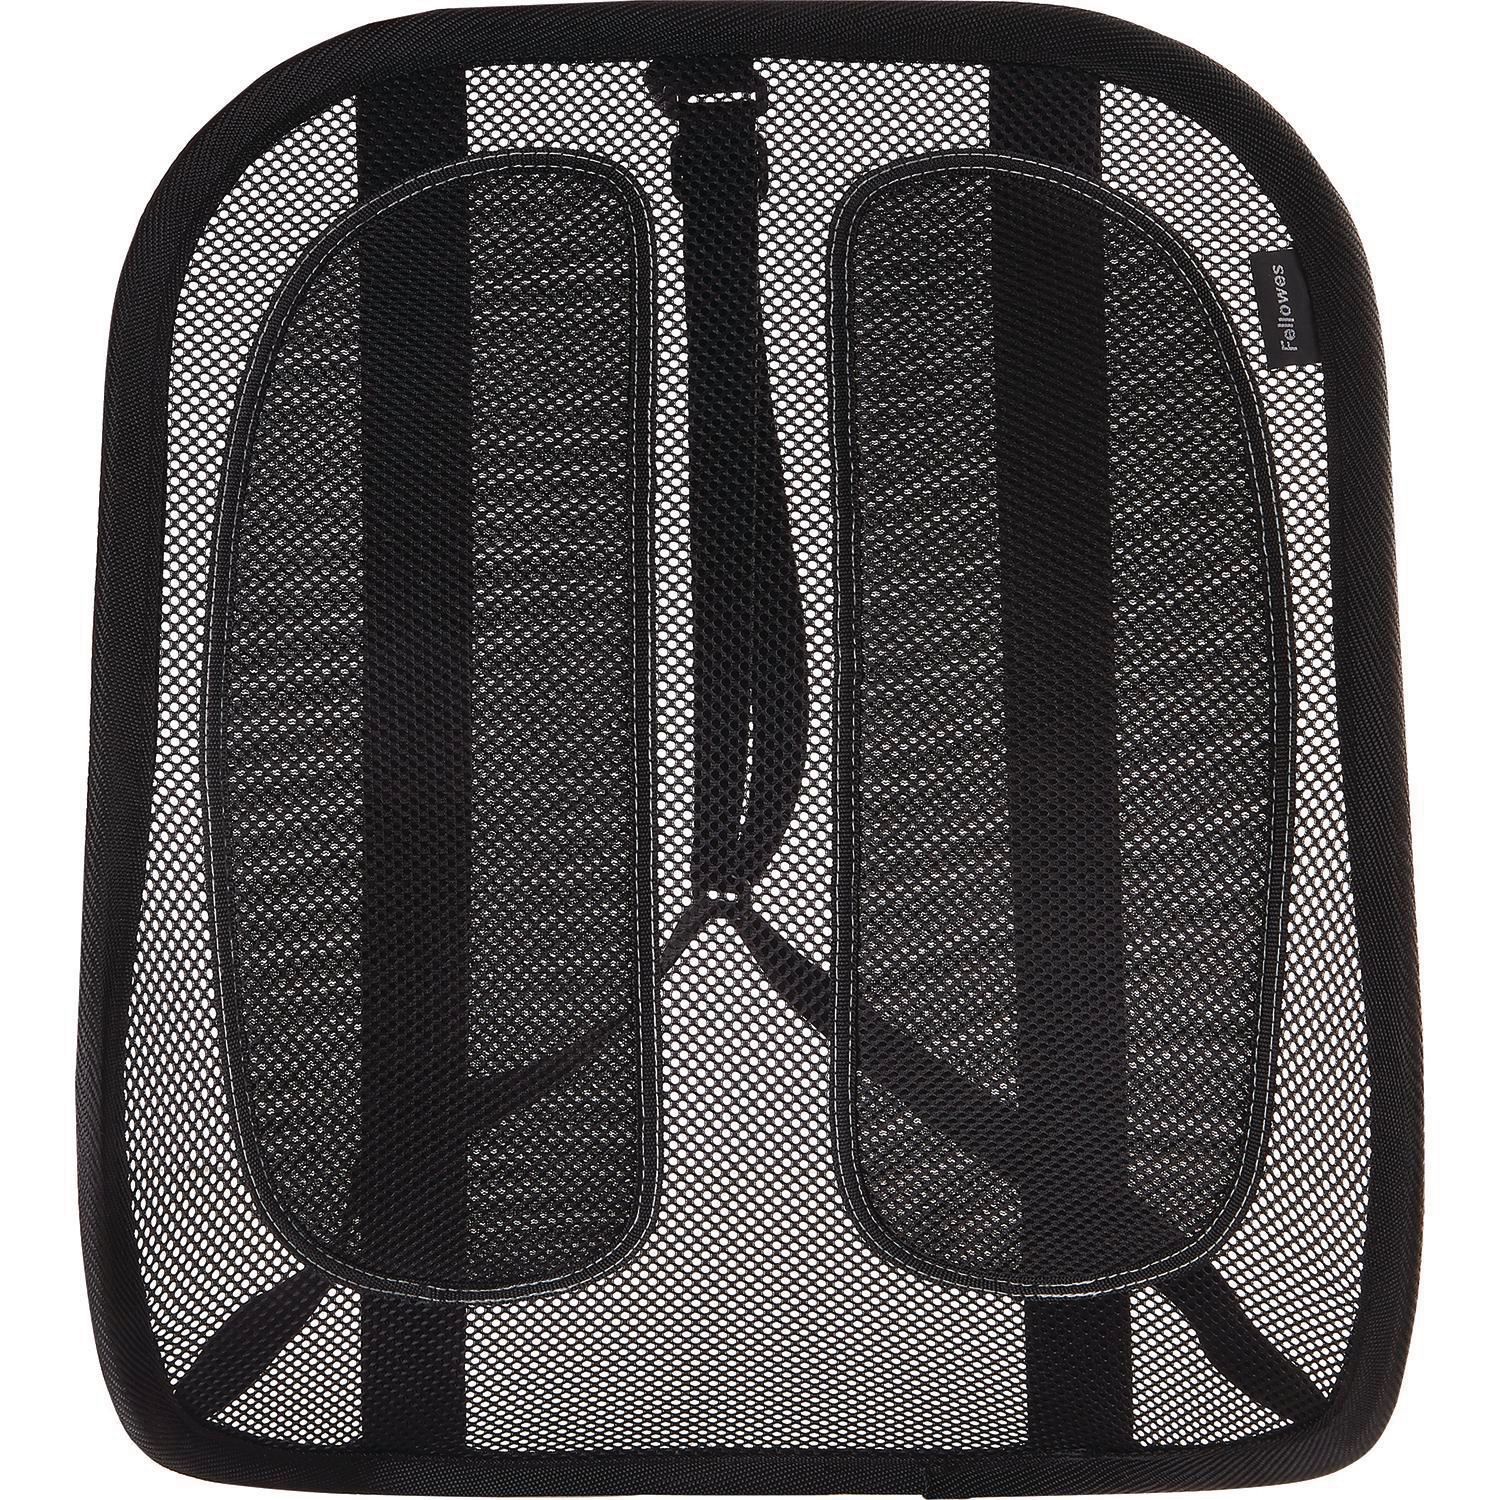 Professional Series™ Mesh Back Support from Posturite